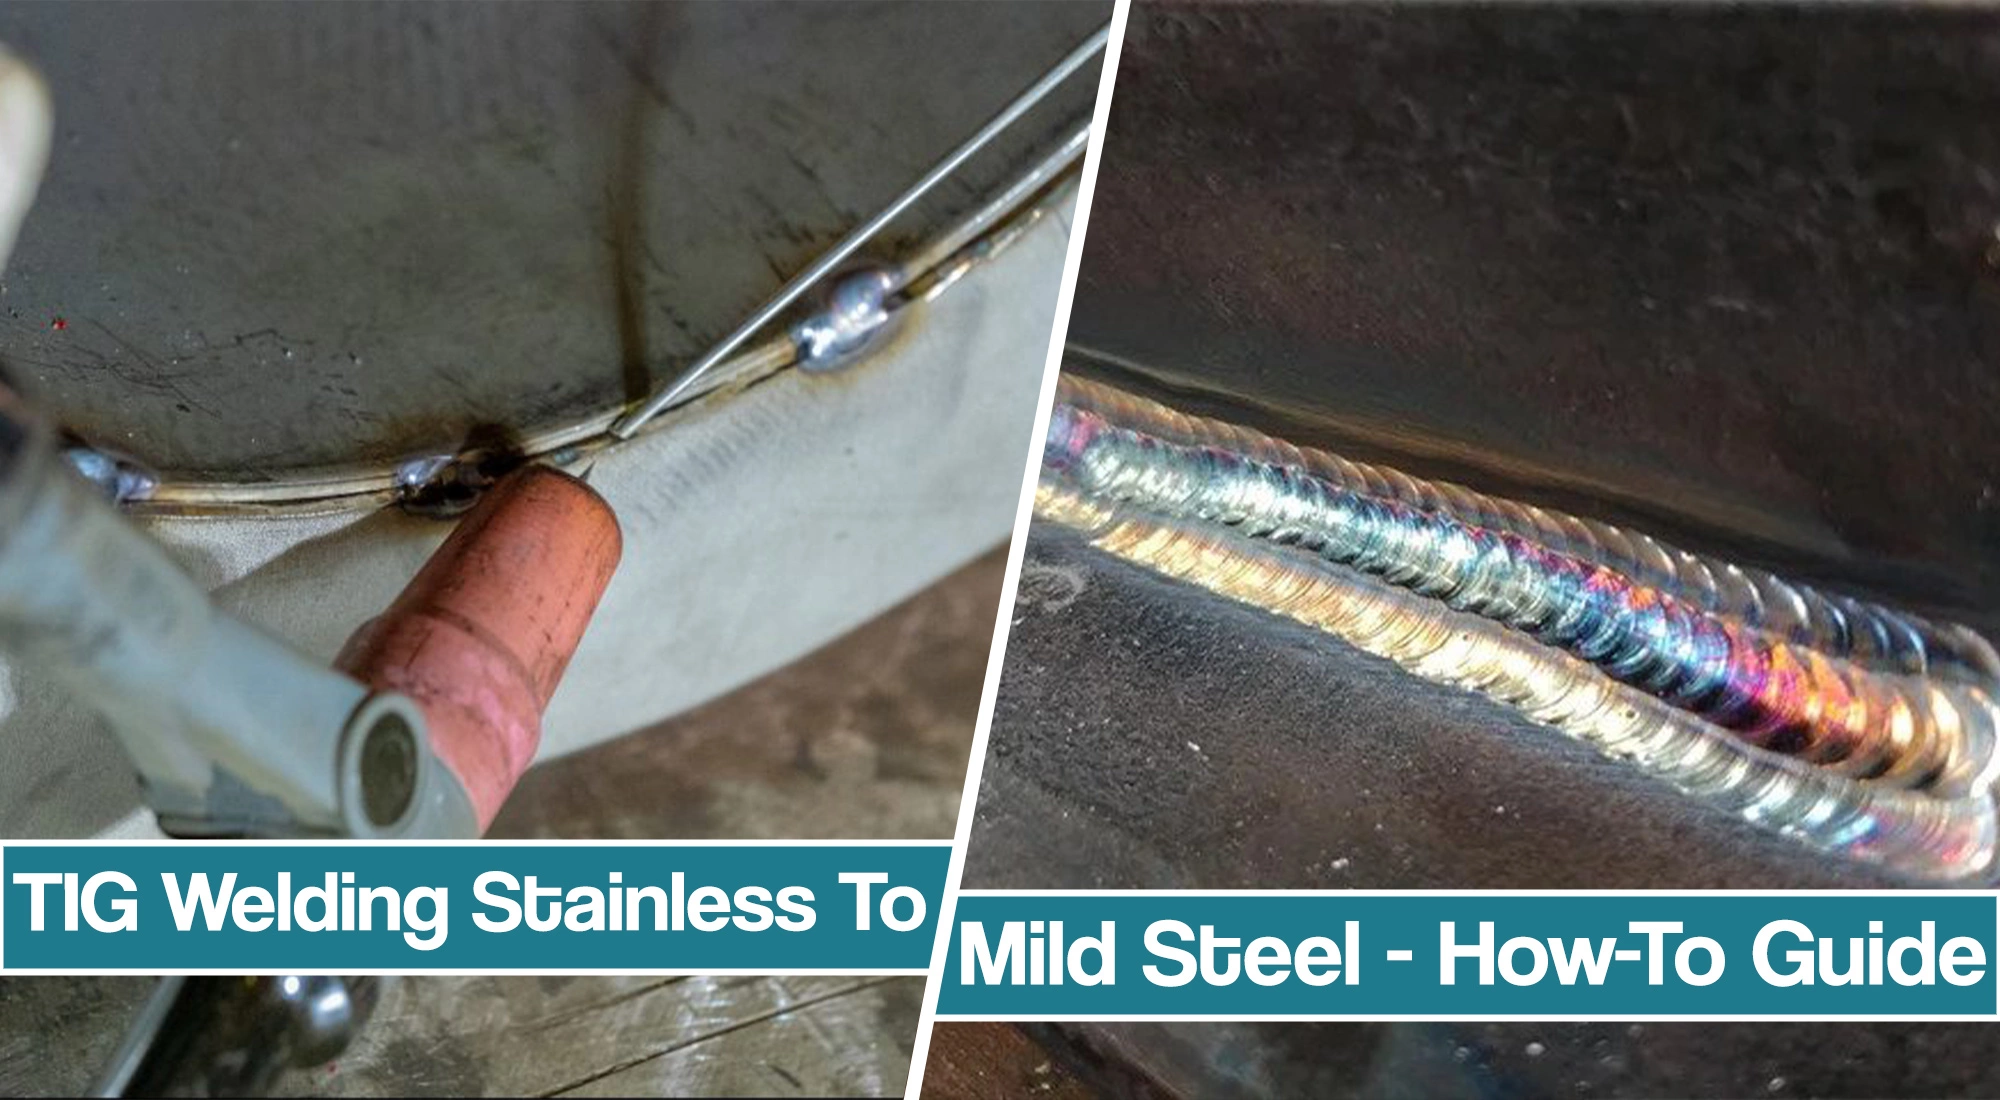 How To TIG Weld Stainless Steel To Mild Steel